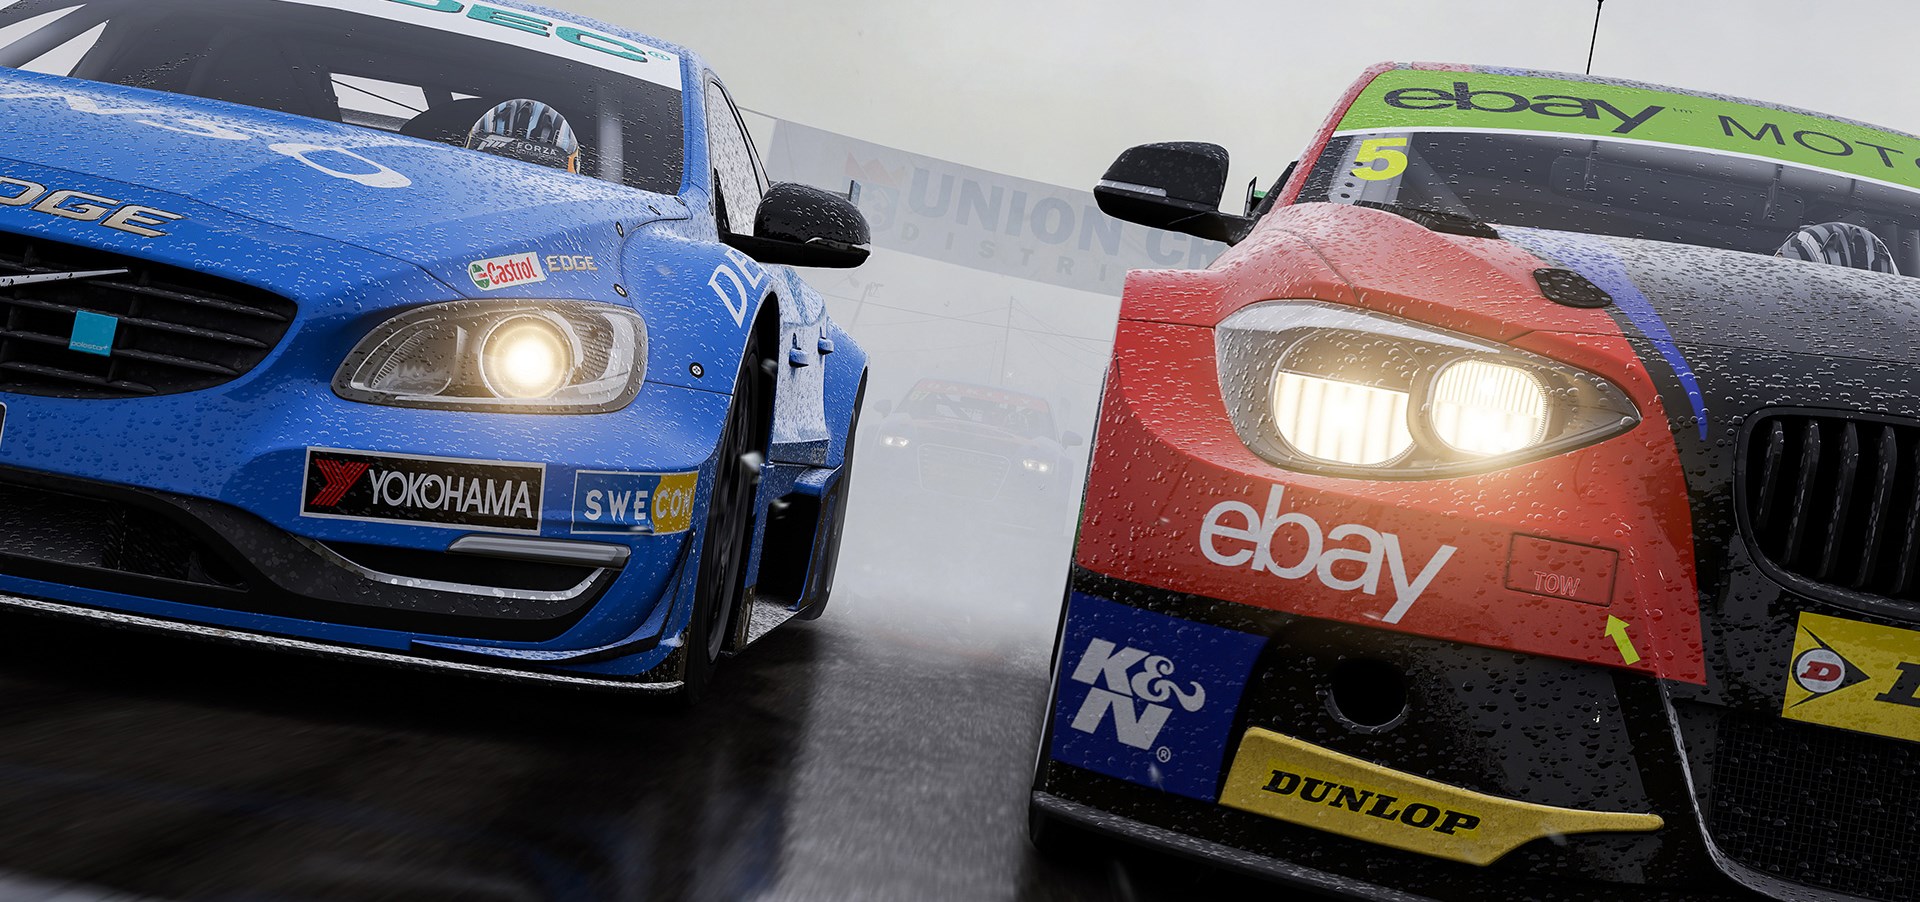 forza motorsport 6 apex pc review ign